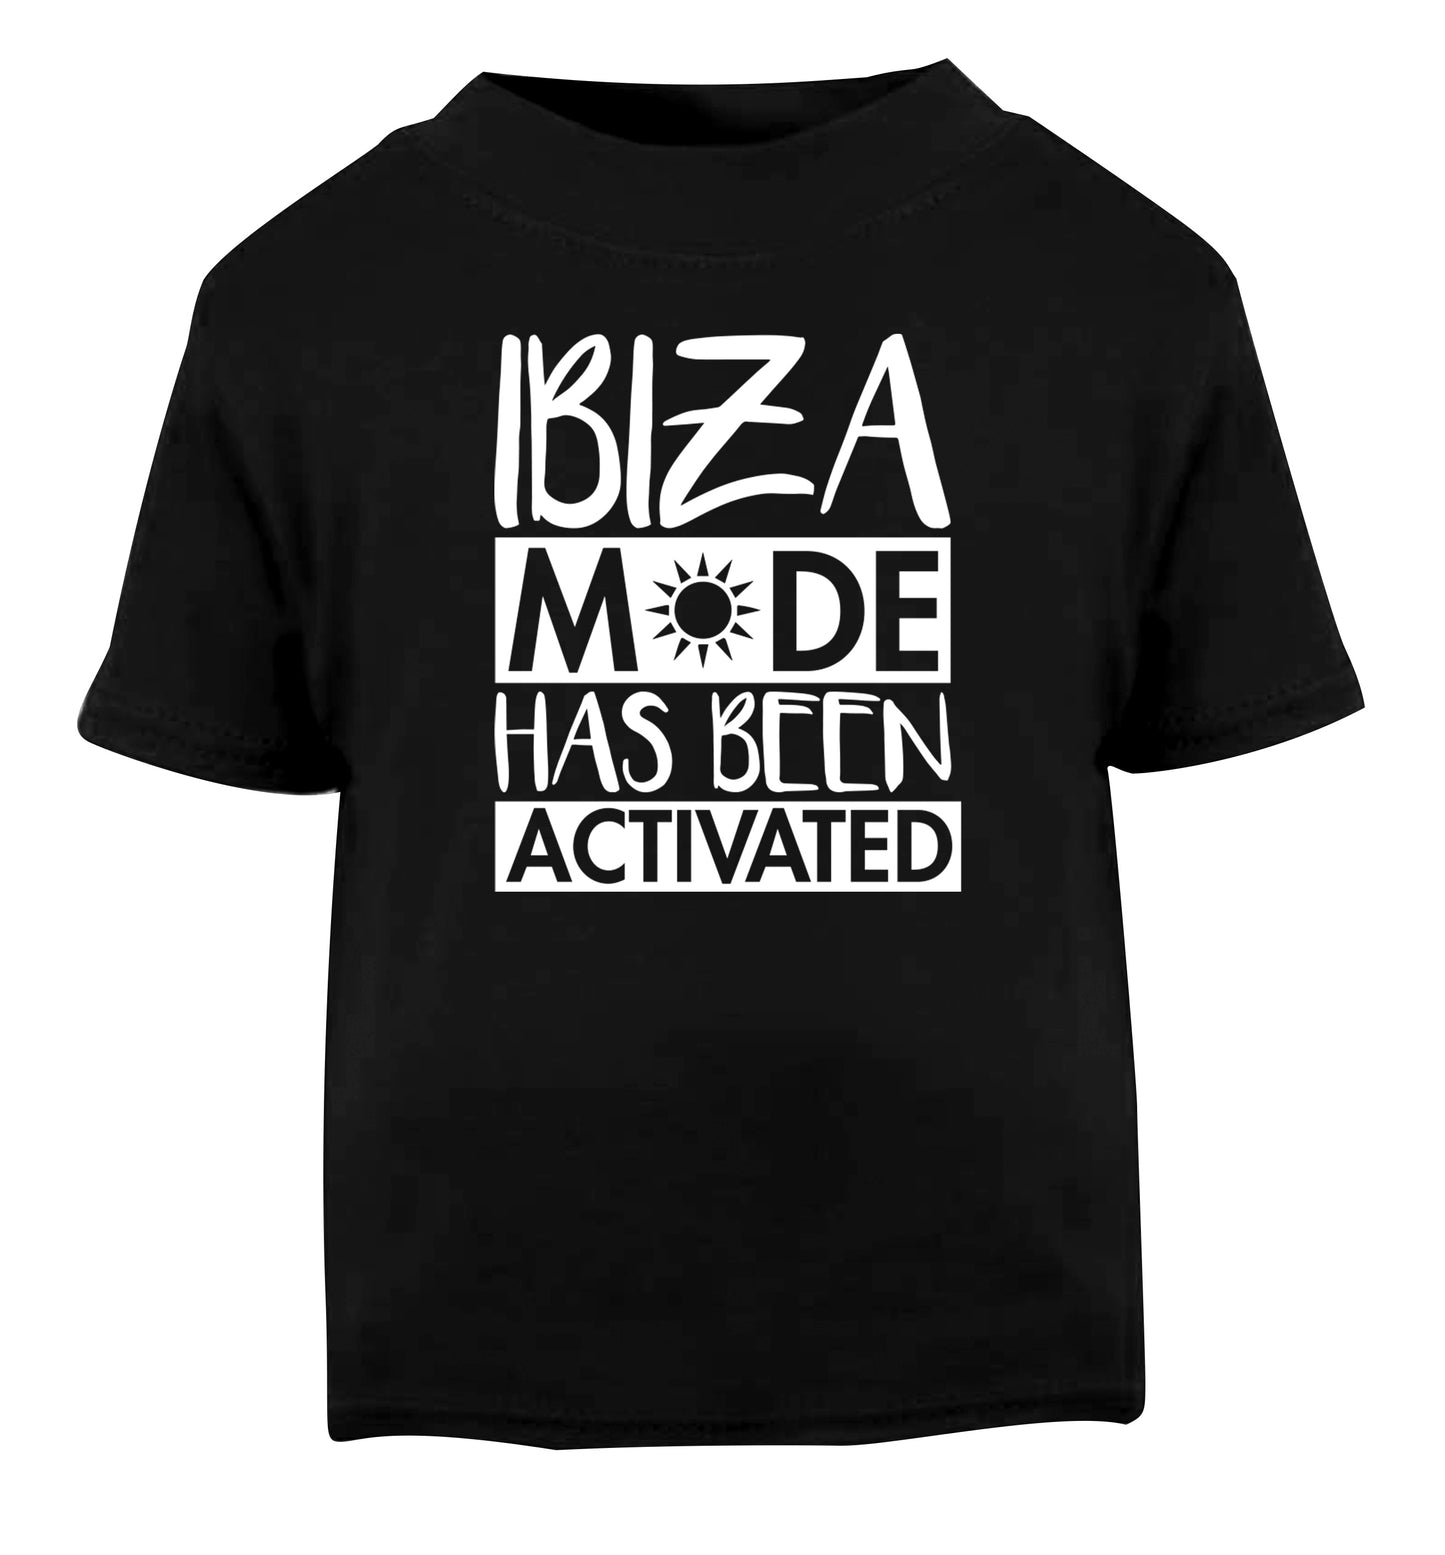 Ibiza mode has been activated Black Baby Toddler Tshirt 2 years